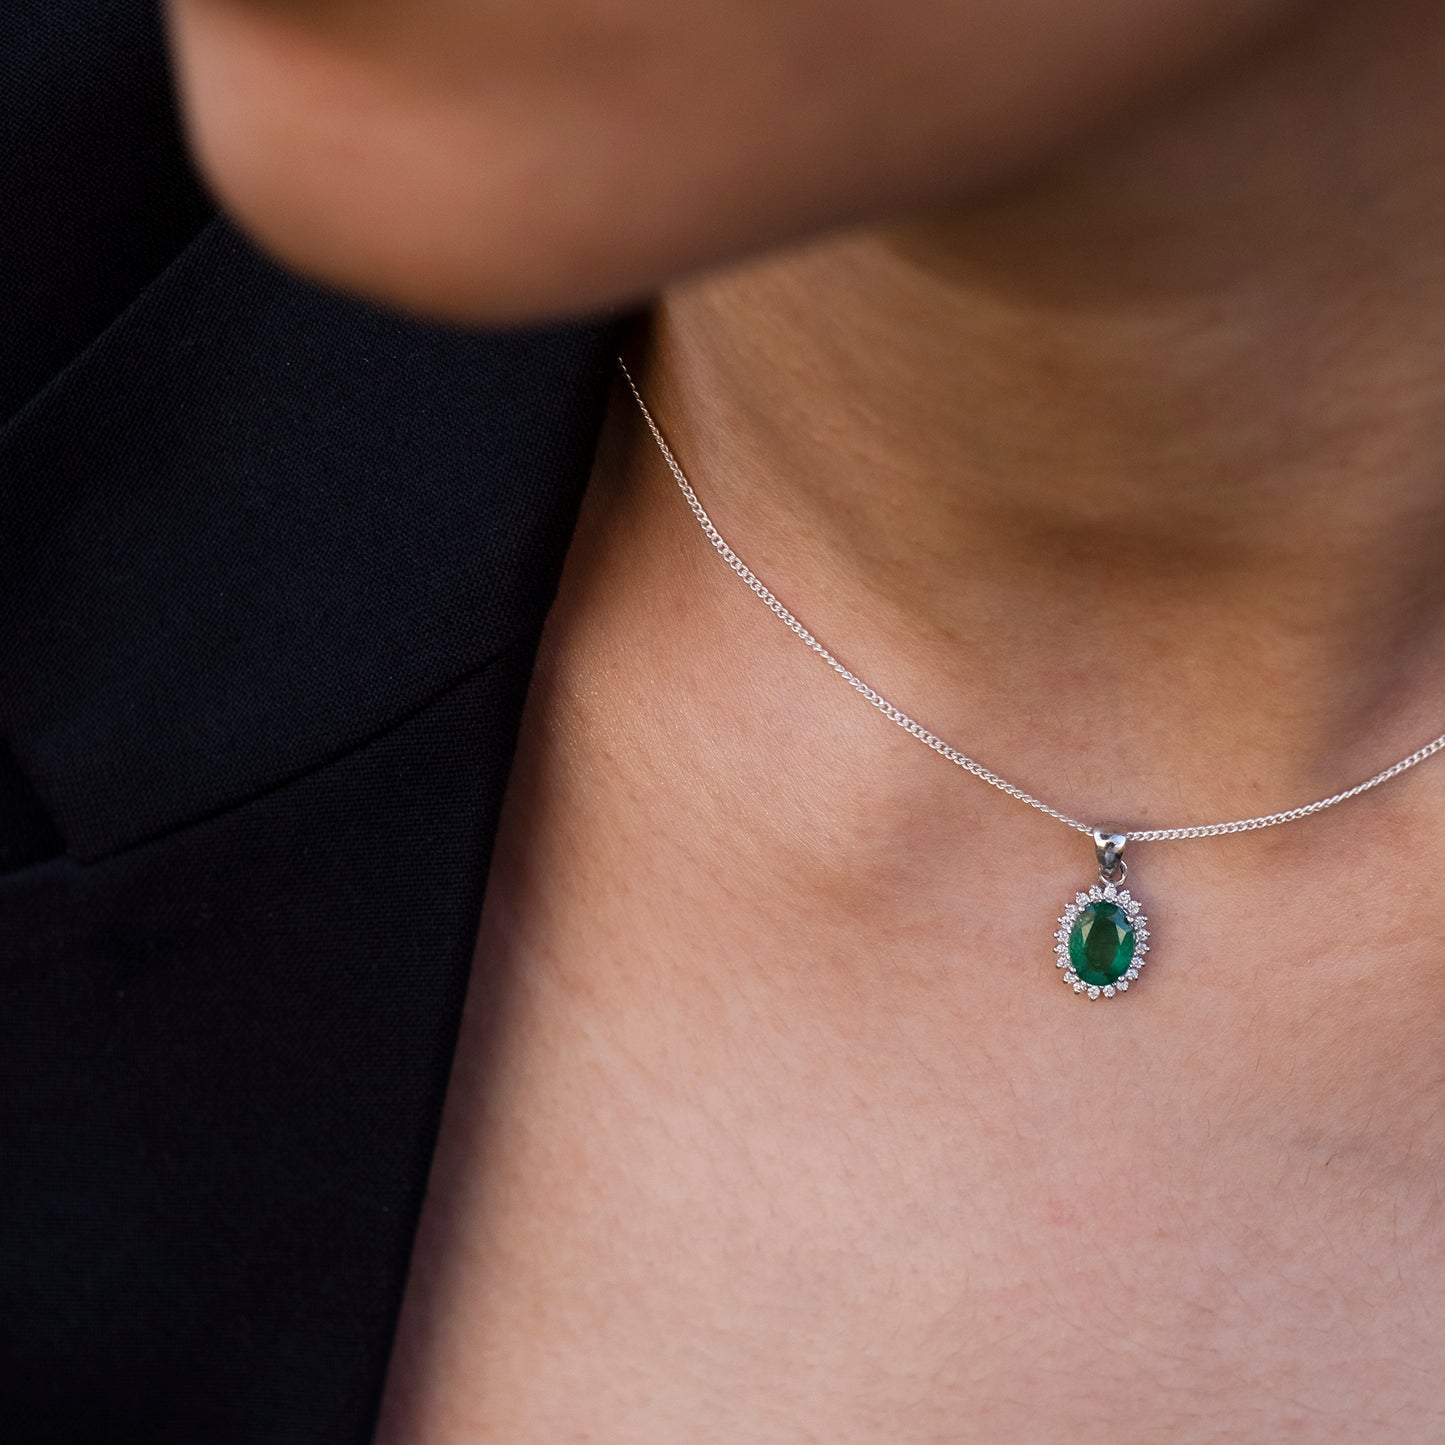 Emerald Necklace, Colombian Emerald Pendant 1.68 Carat Appraised at  1,350.00 Sterling Silver, Real Emerald Cut Jewellery, Natural, Genuine